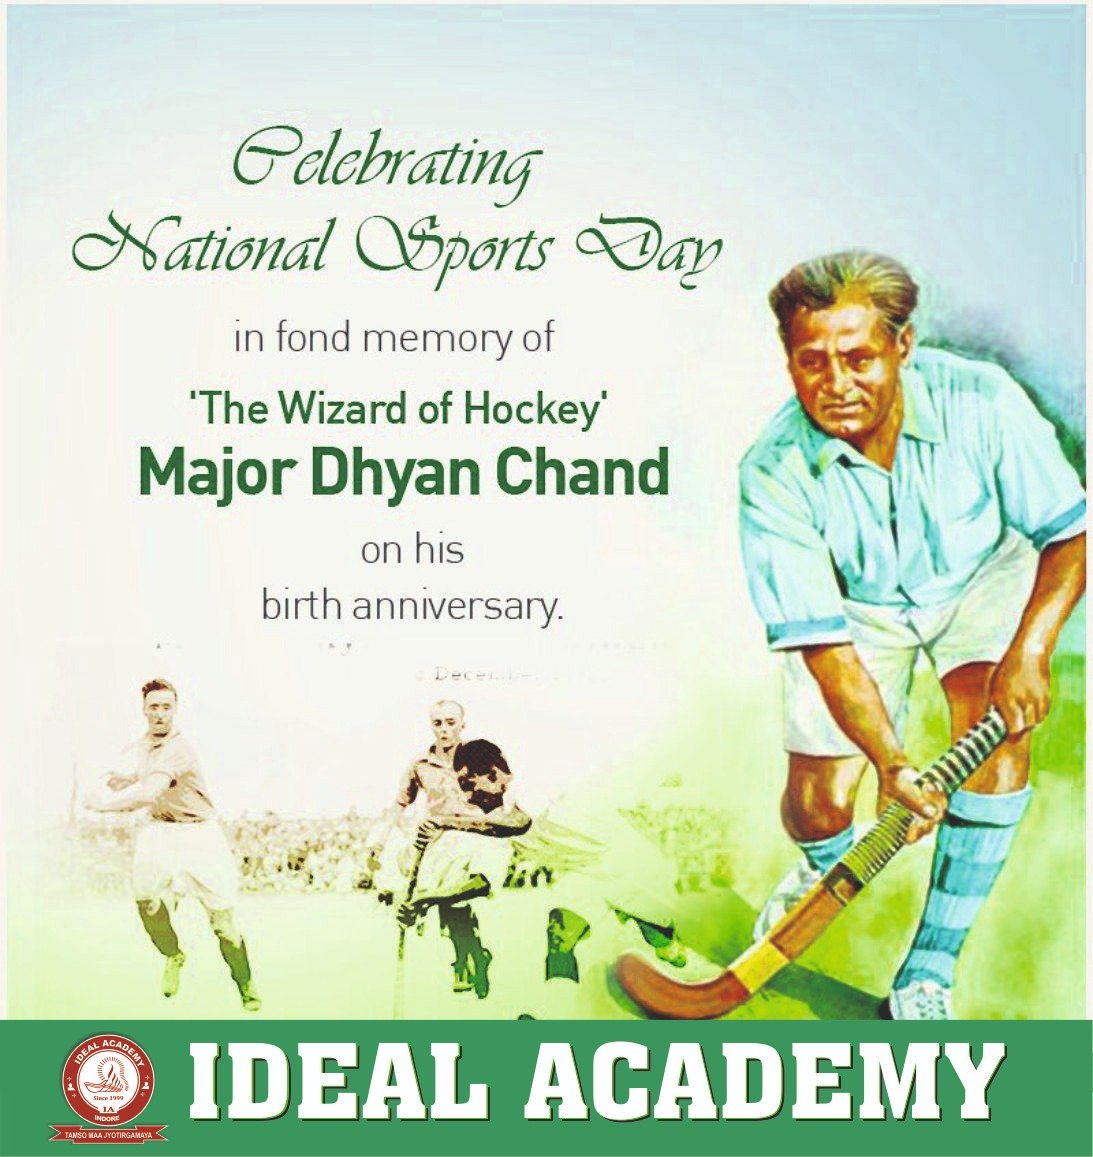 National Sports Day